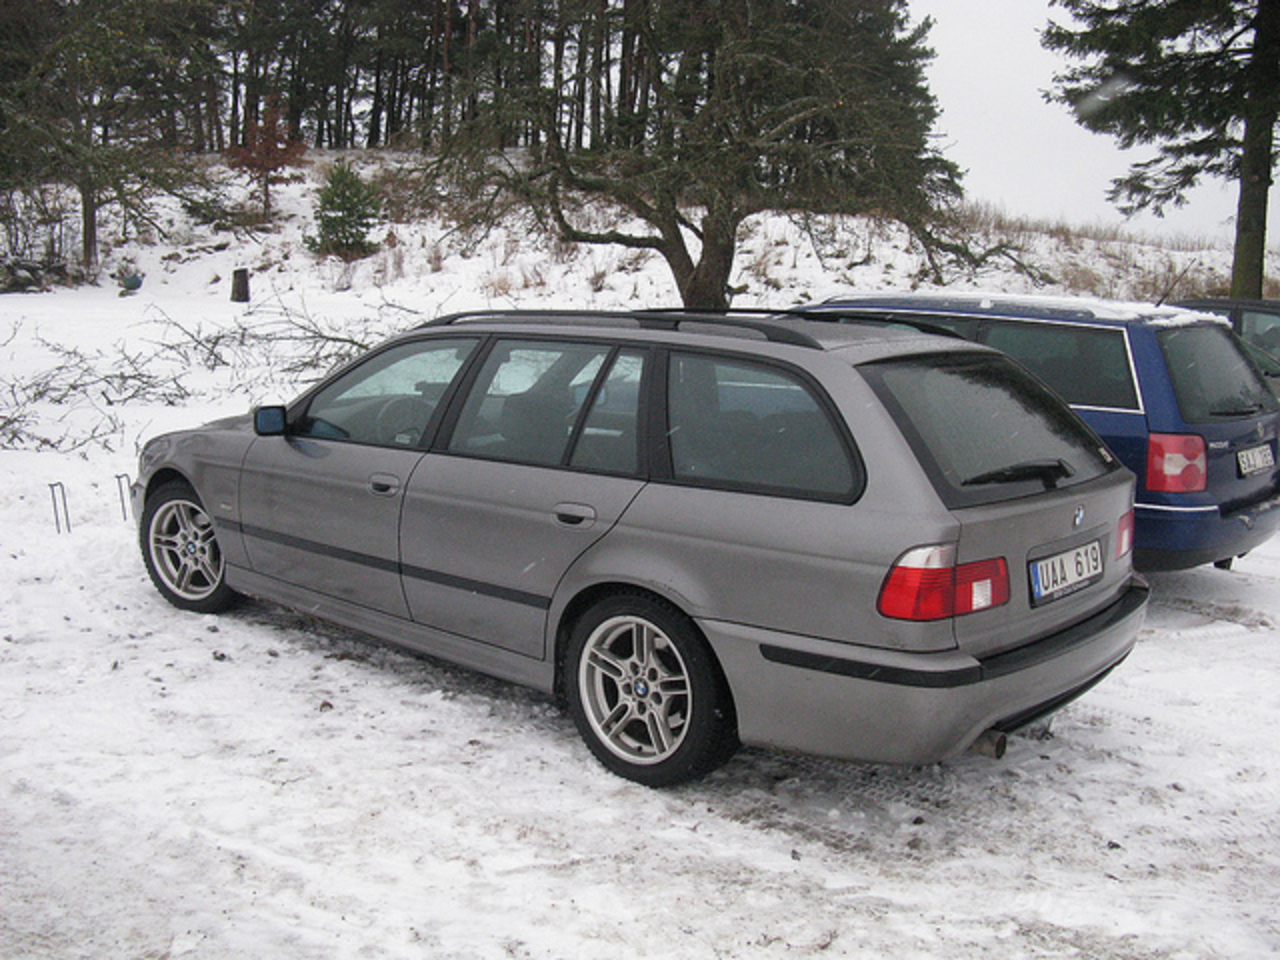 BMW 525i Touring M Sport E39 | Flickr - Photo Sharing!